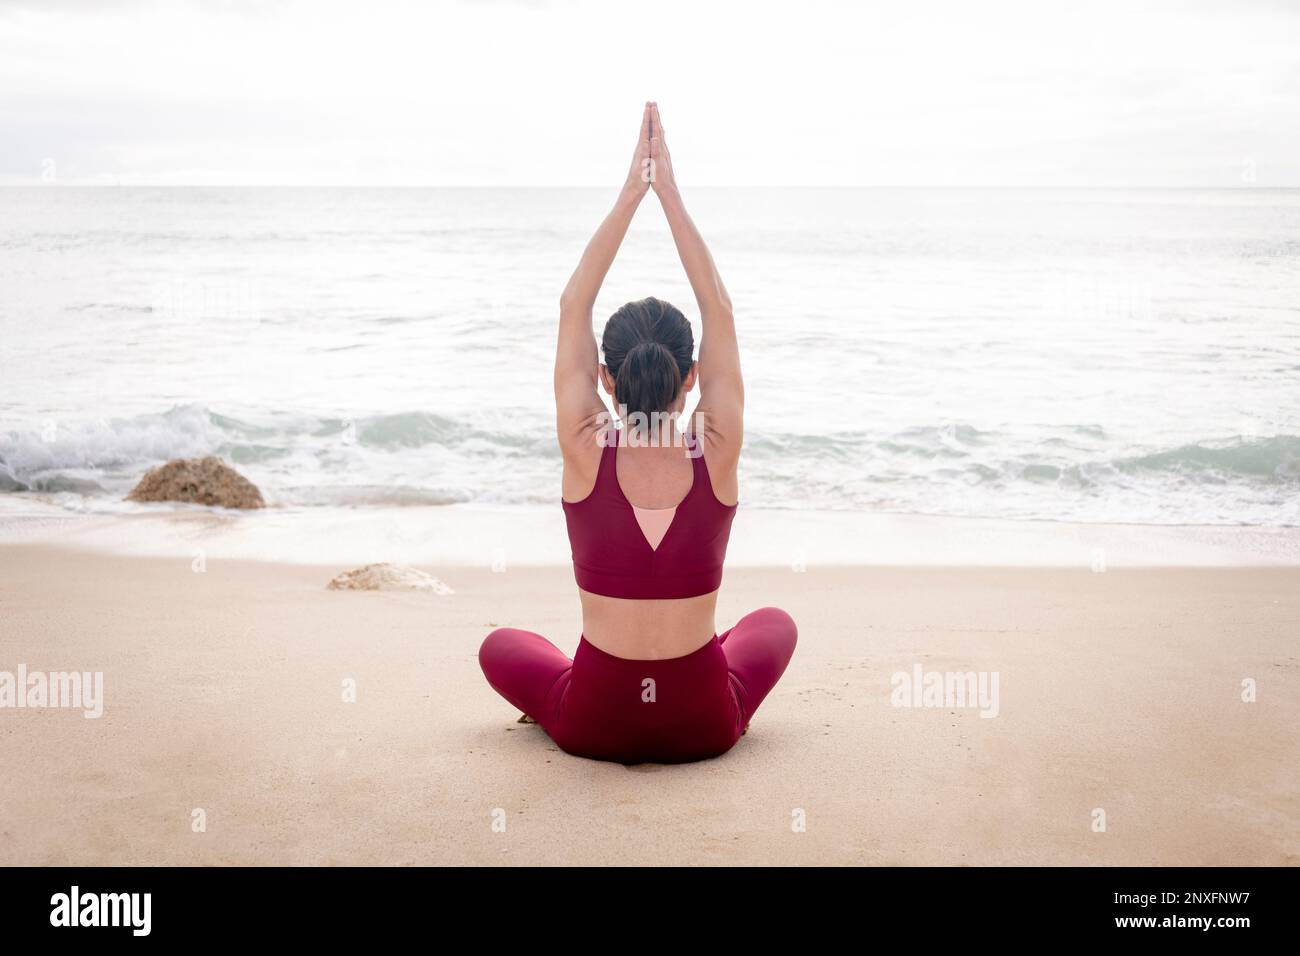 woman sitting on the beach and meditating, rear view. Stock Photo